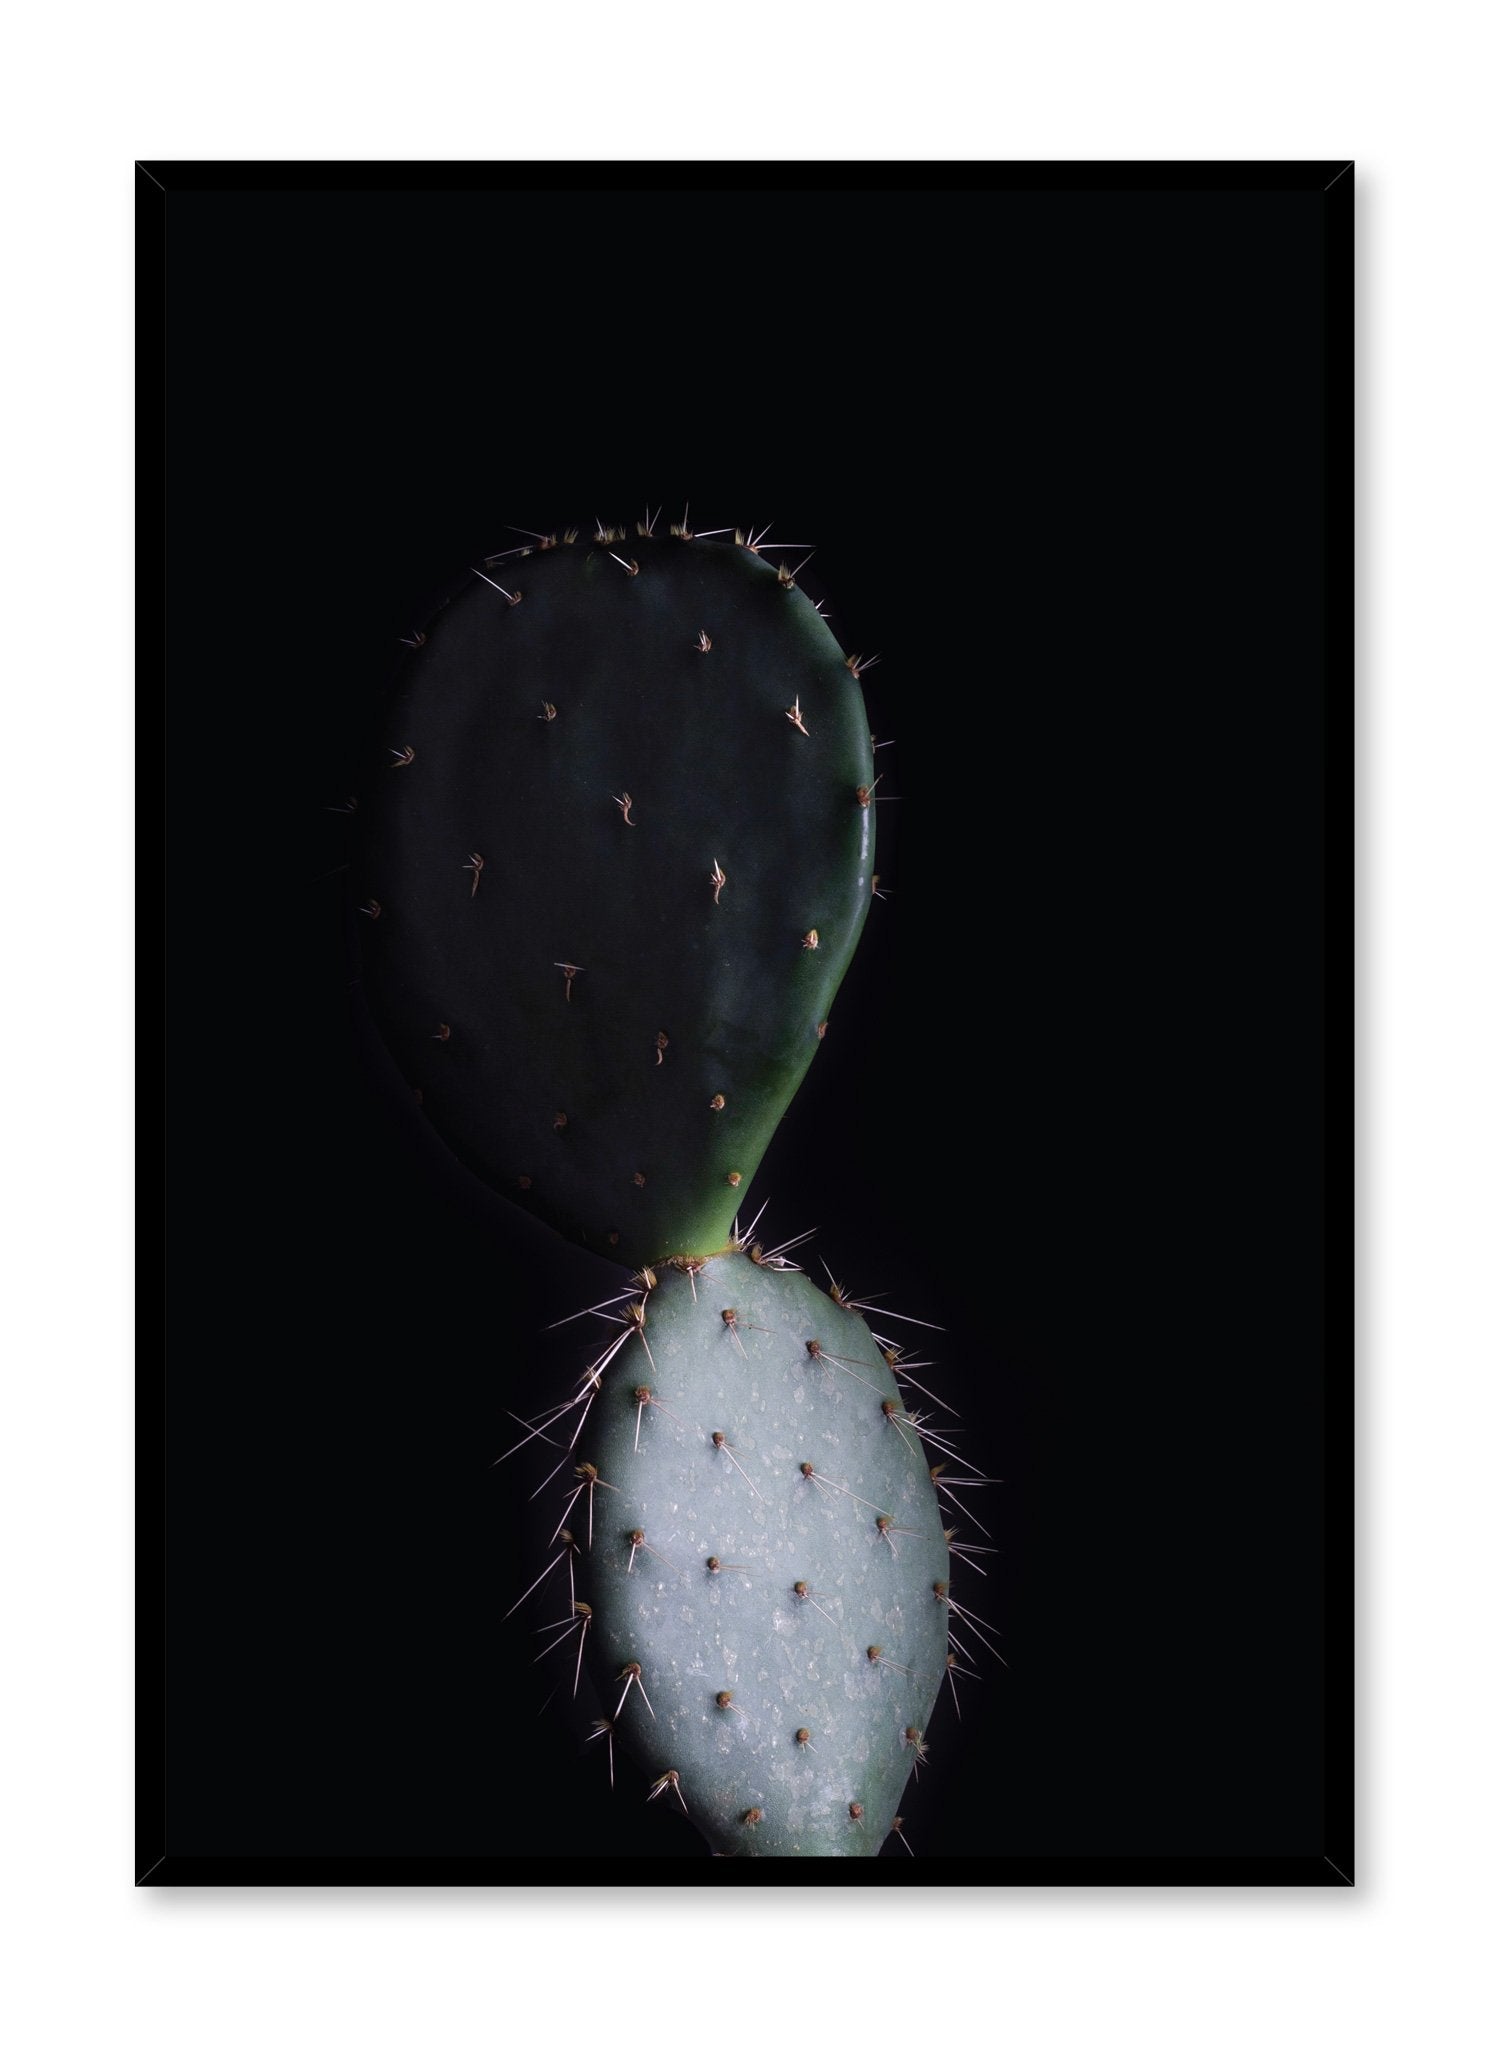 Scandinavian poster by Opposite Wall with cactus art photo design on black bacground - Reflection